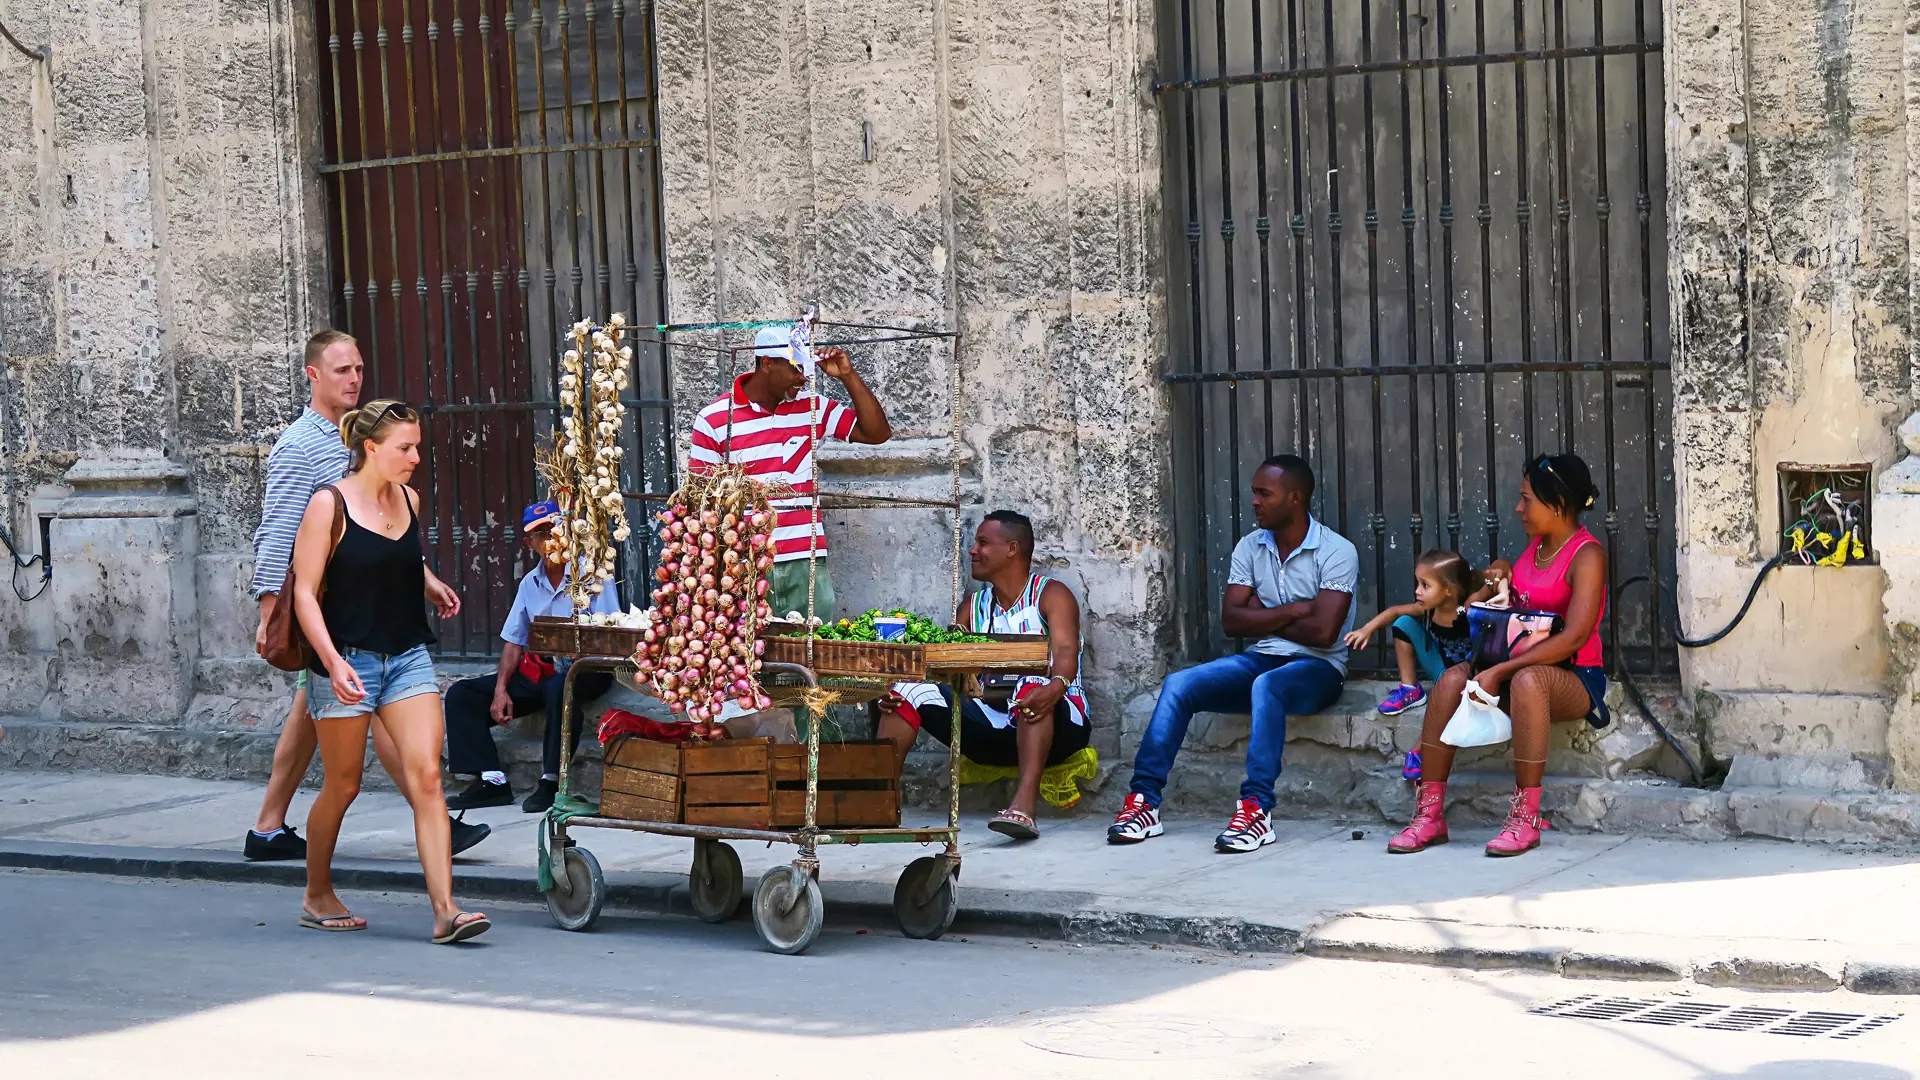 shutterstock_586727399  a typical day in one of the streets of Havana.jpg